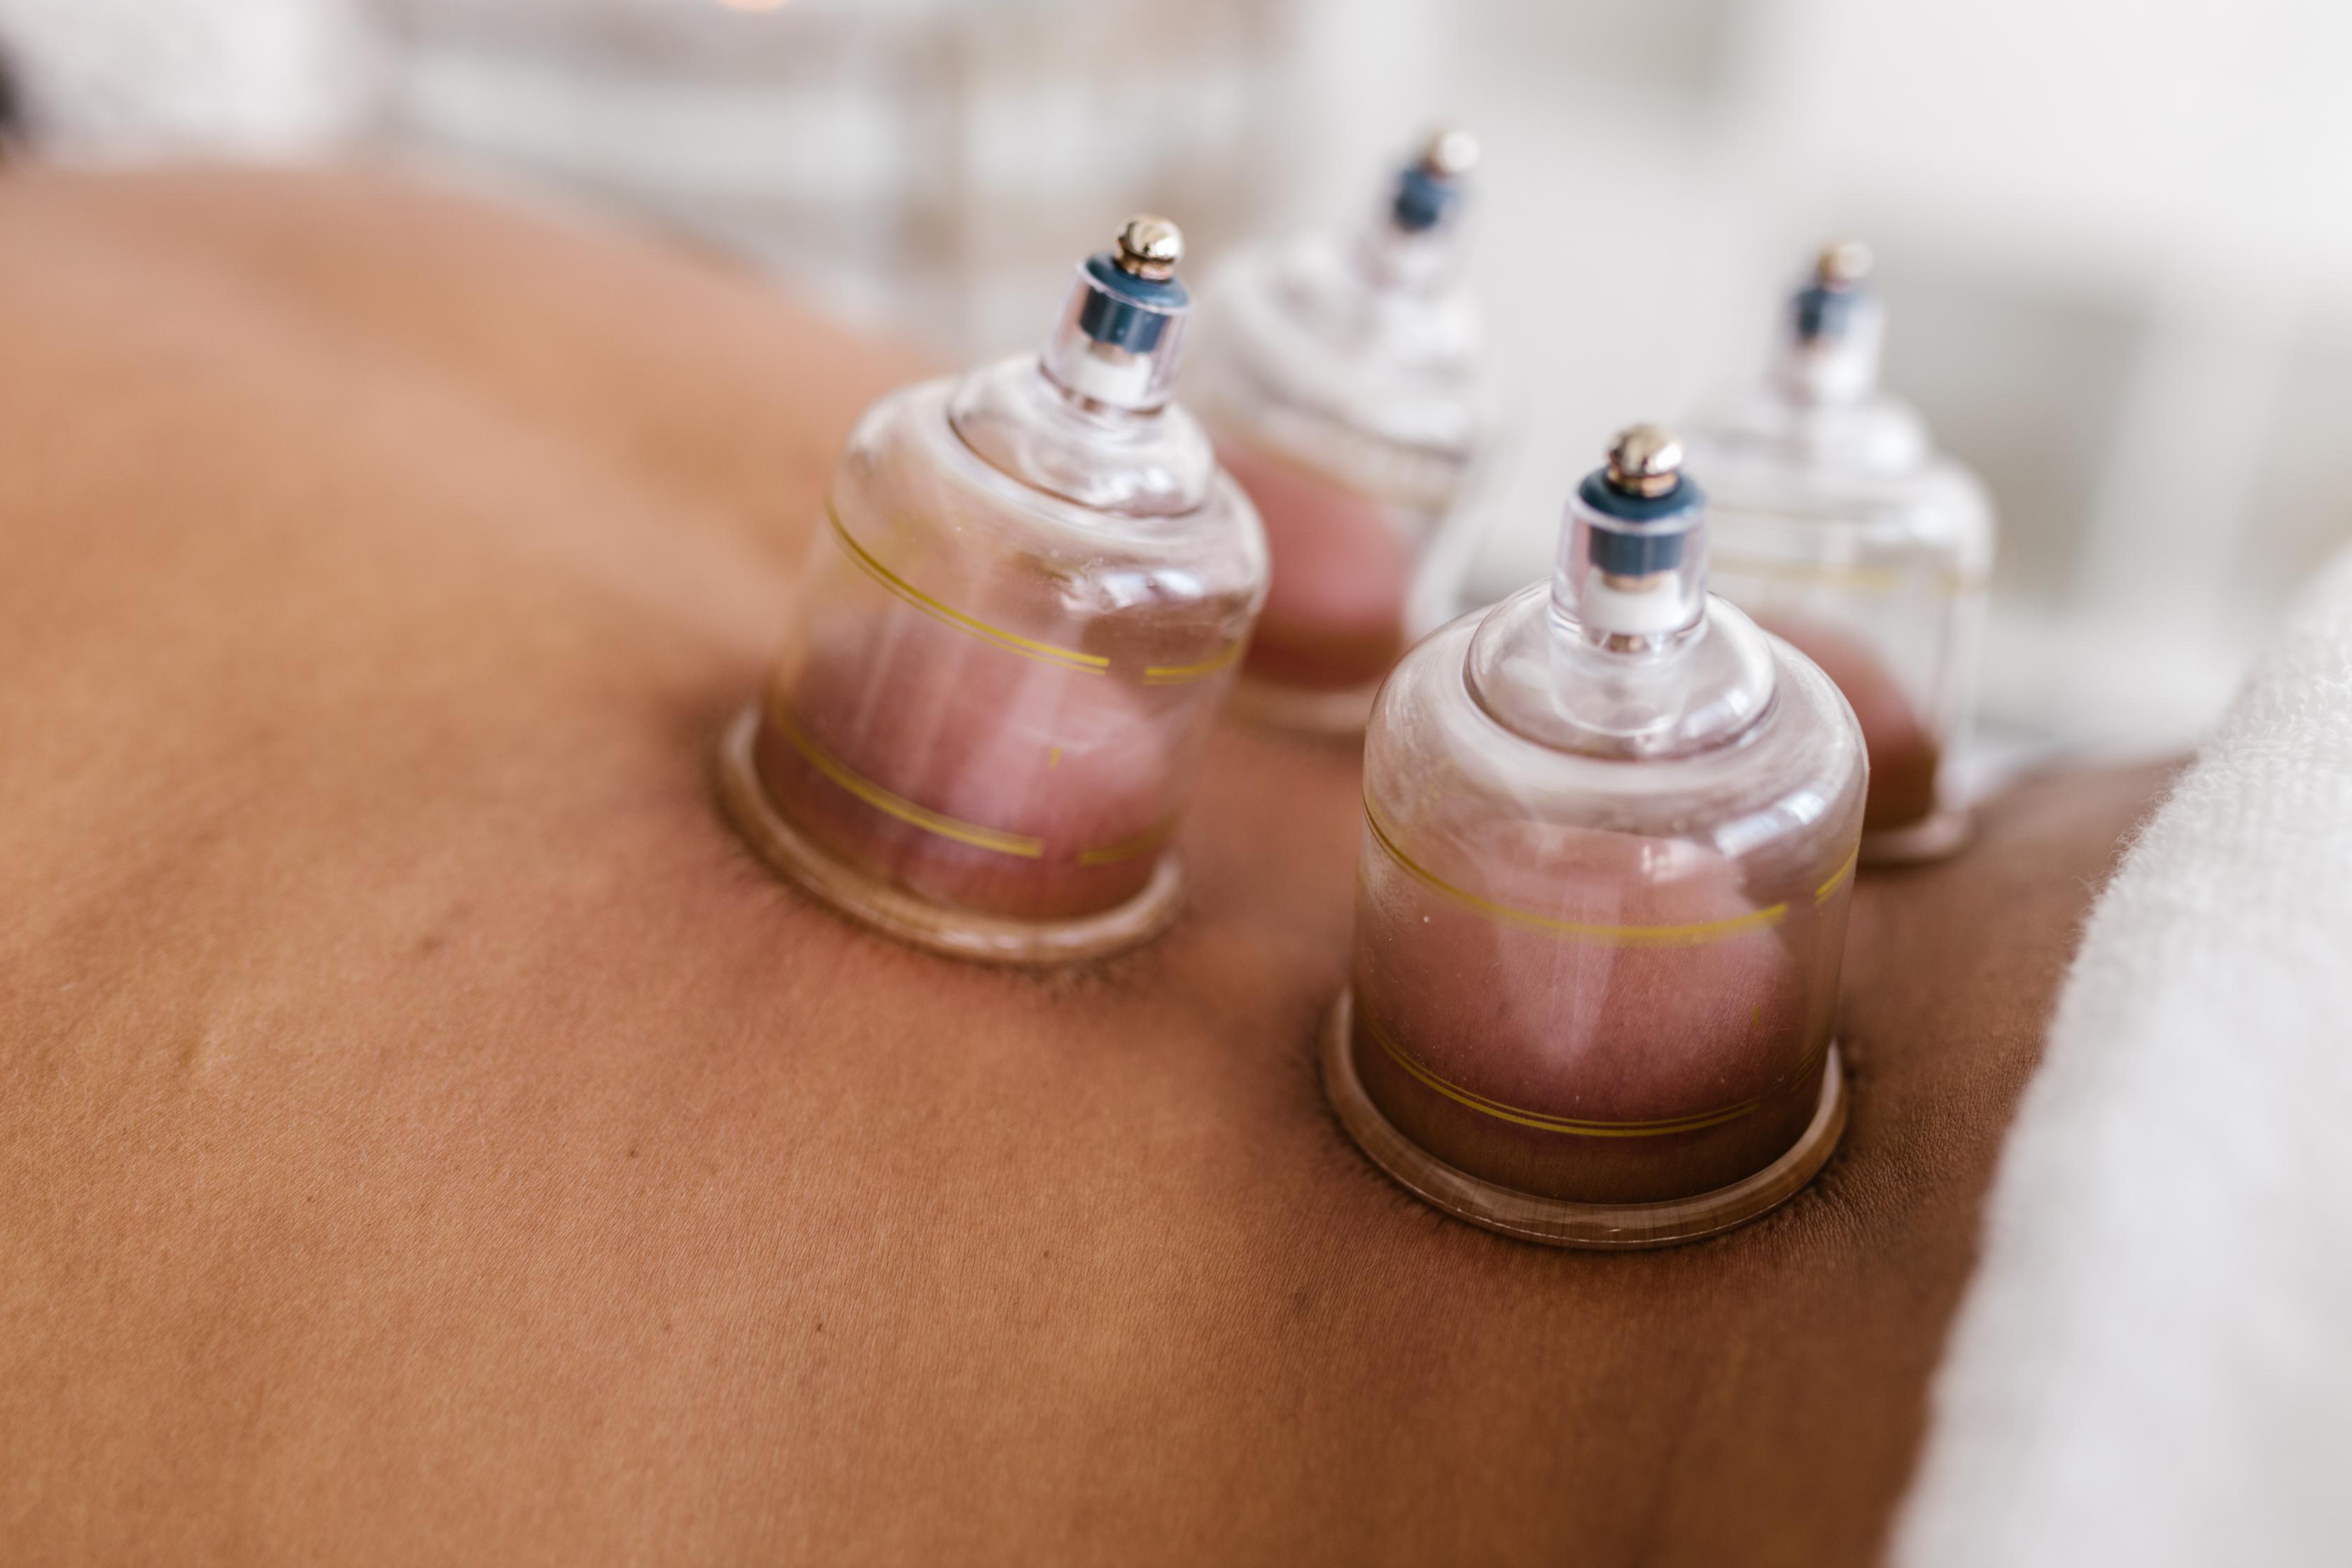 A Placebo Or Performance Enhancer: Cupping Therapy